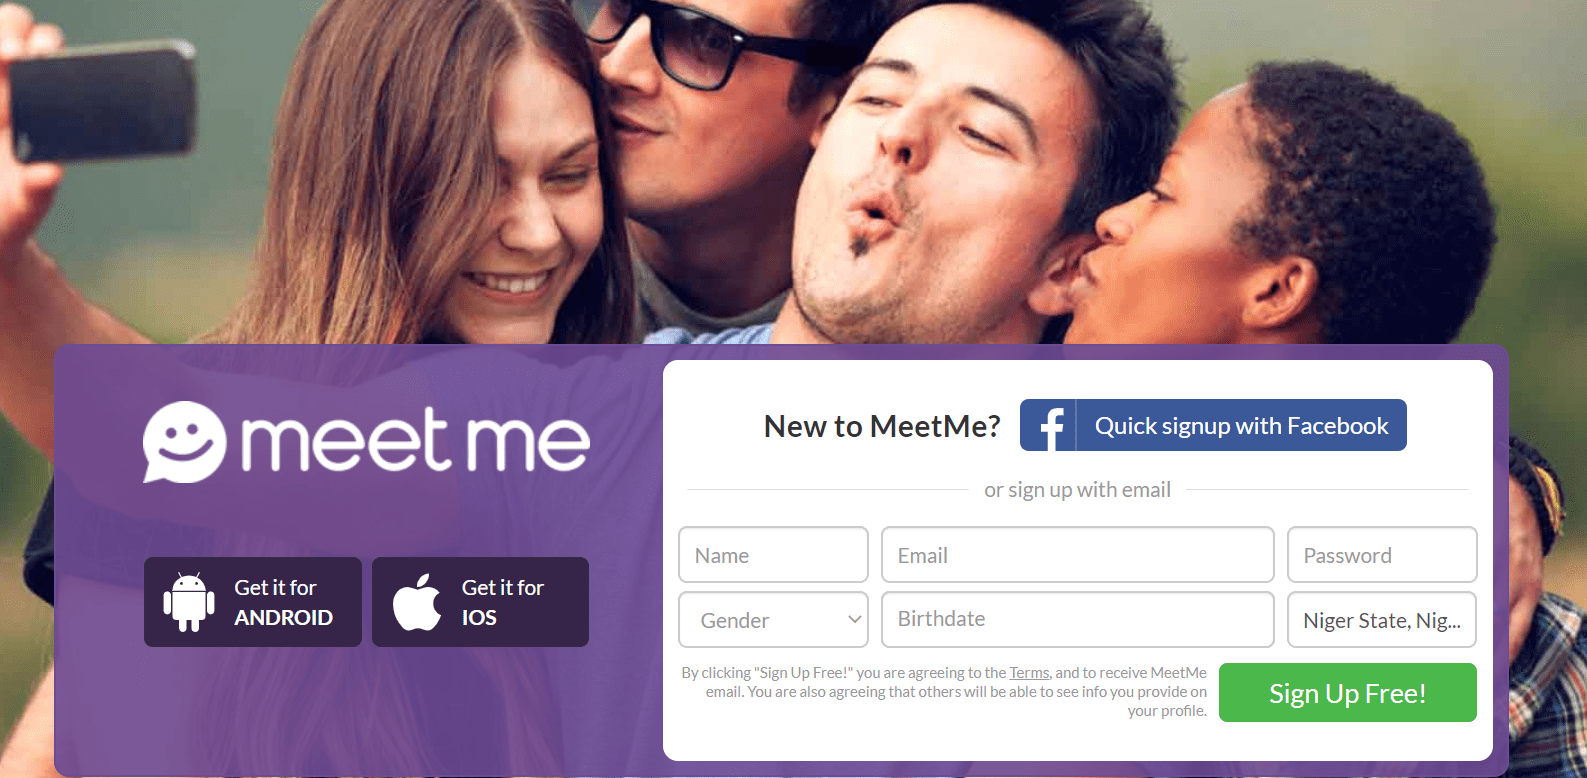 Login to Meetme or Sign Up for a Meetme Account